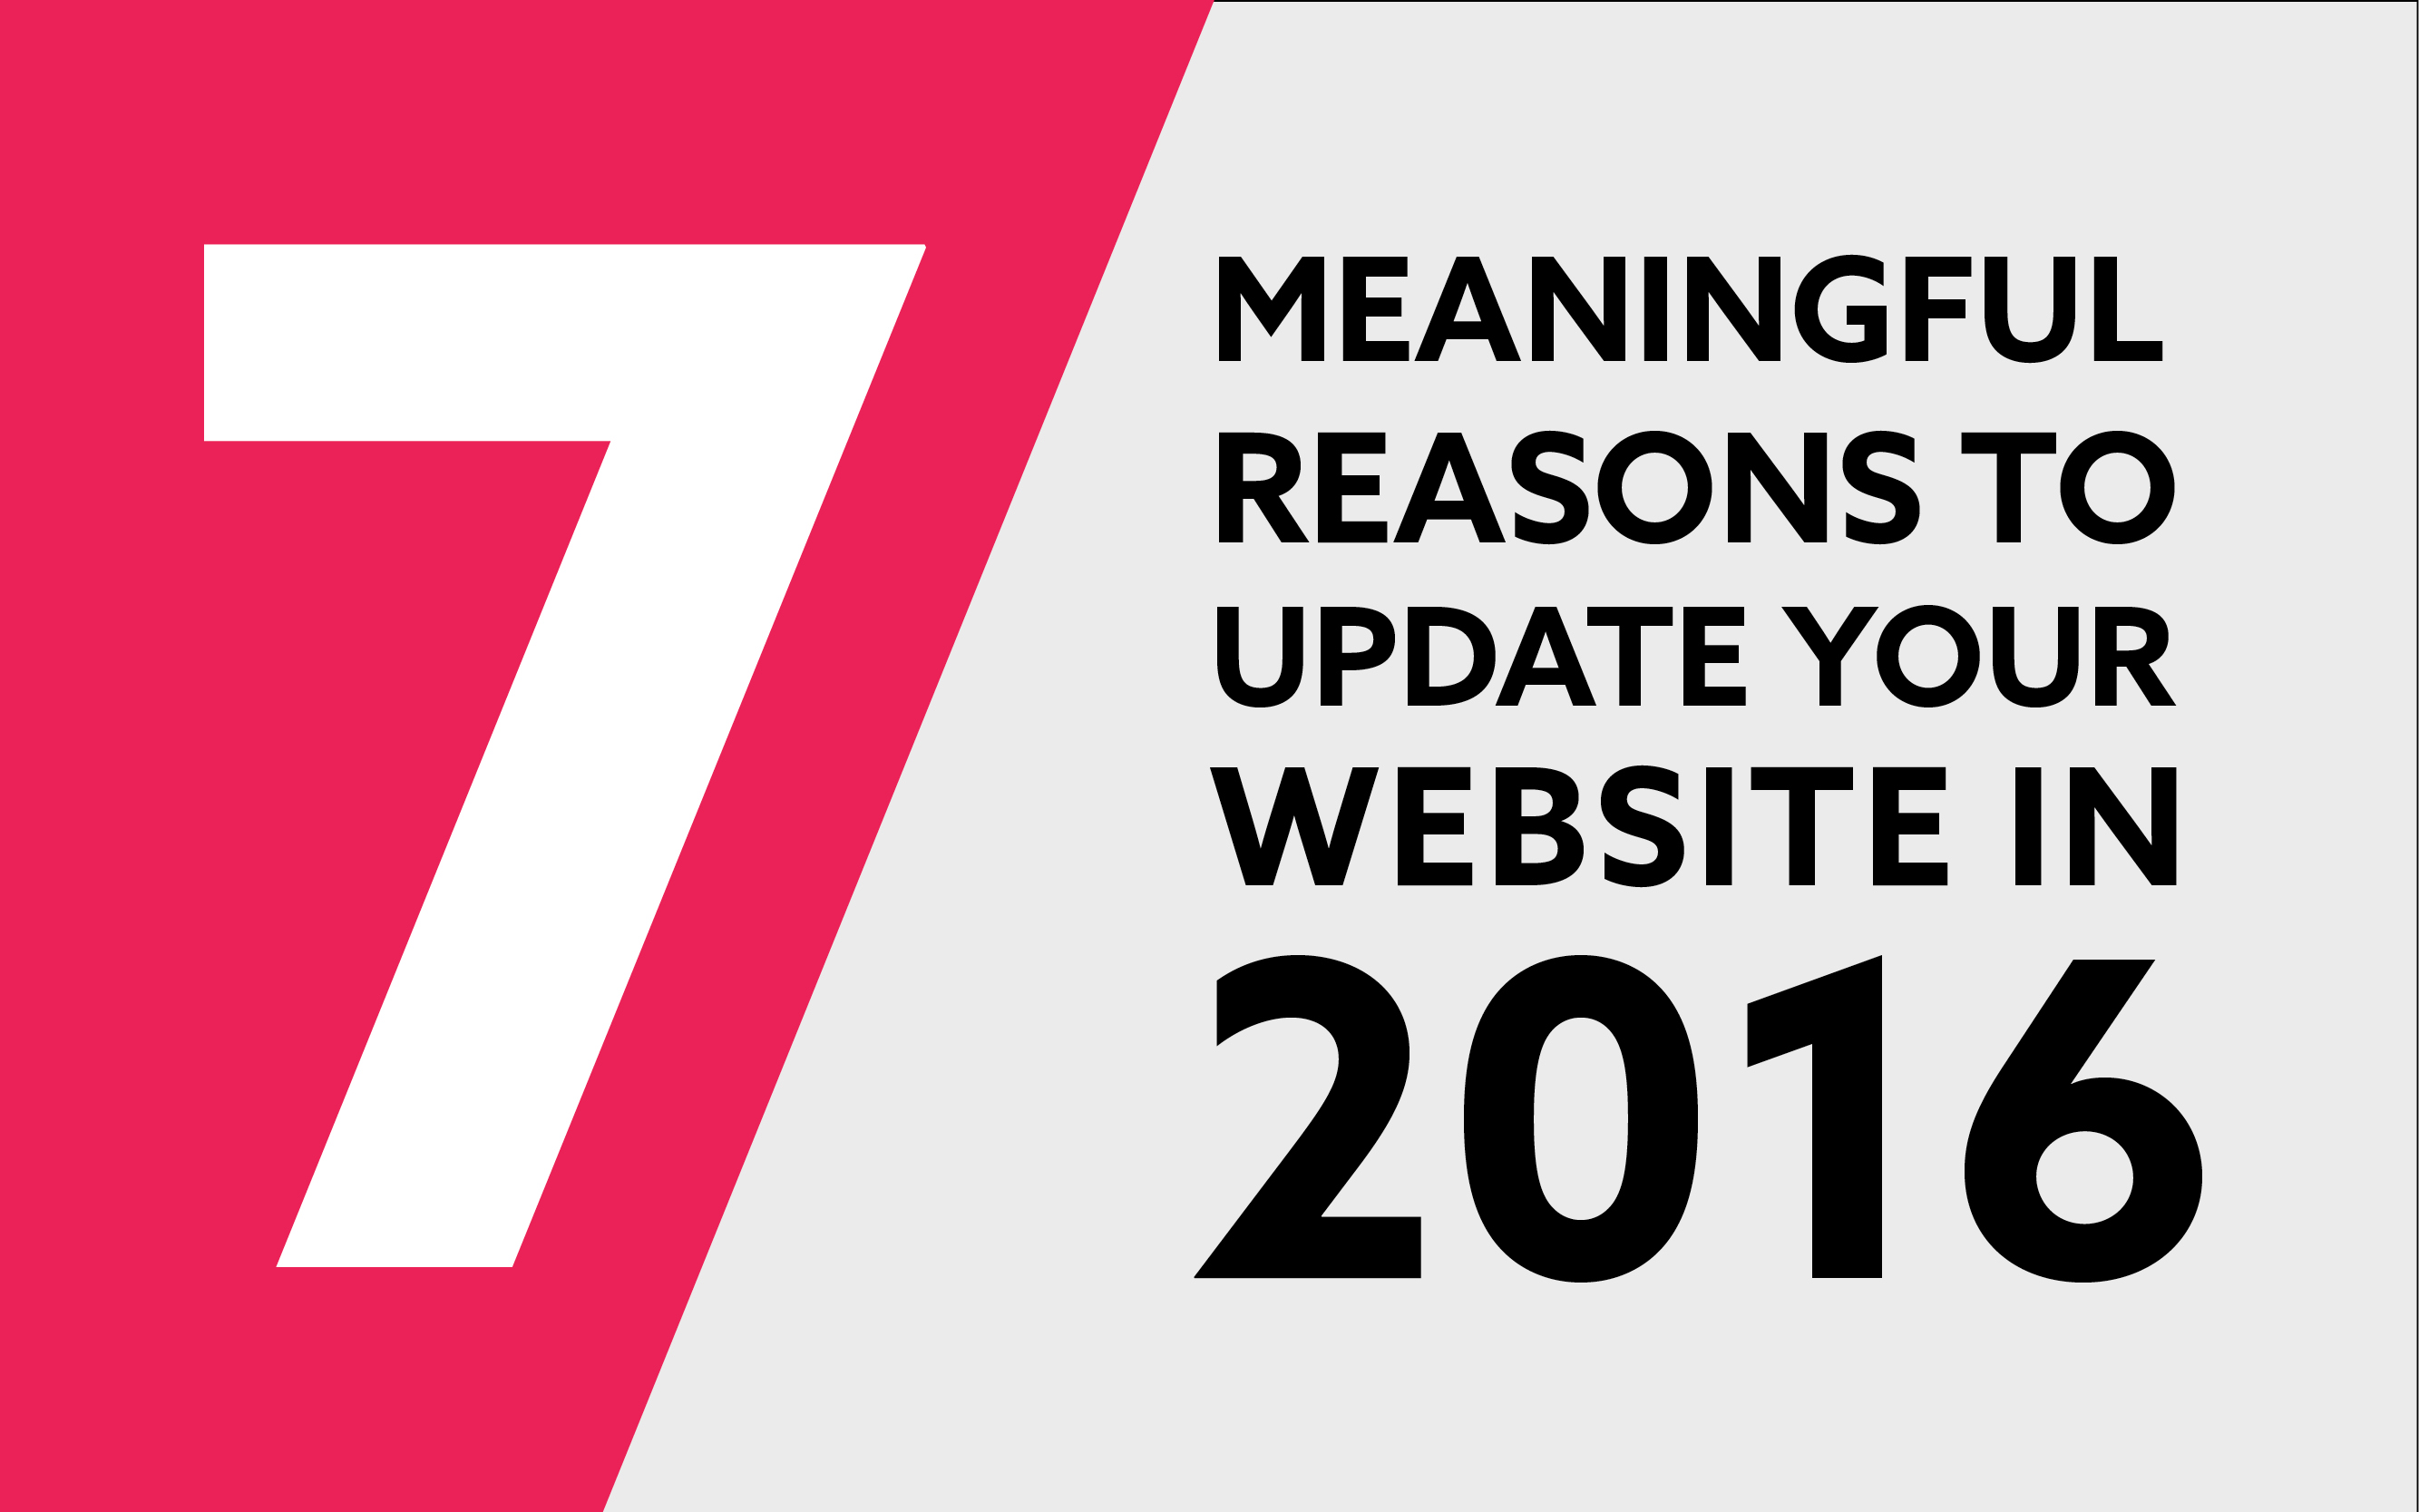 7 meaningful reasons to update your website in 2016